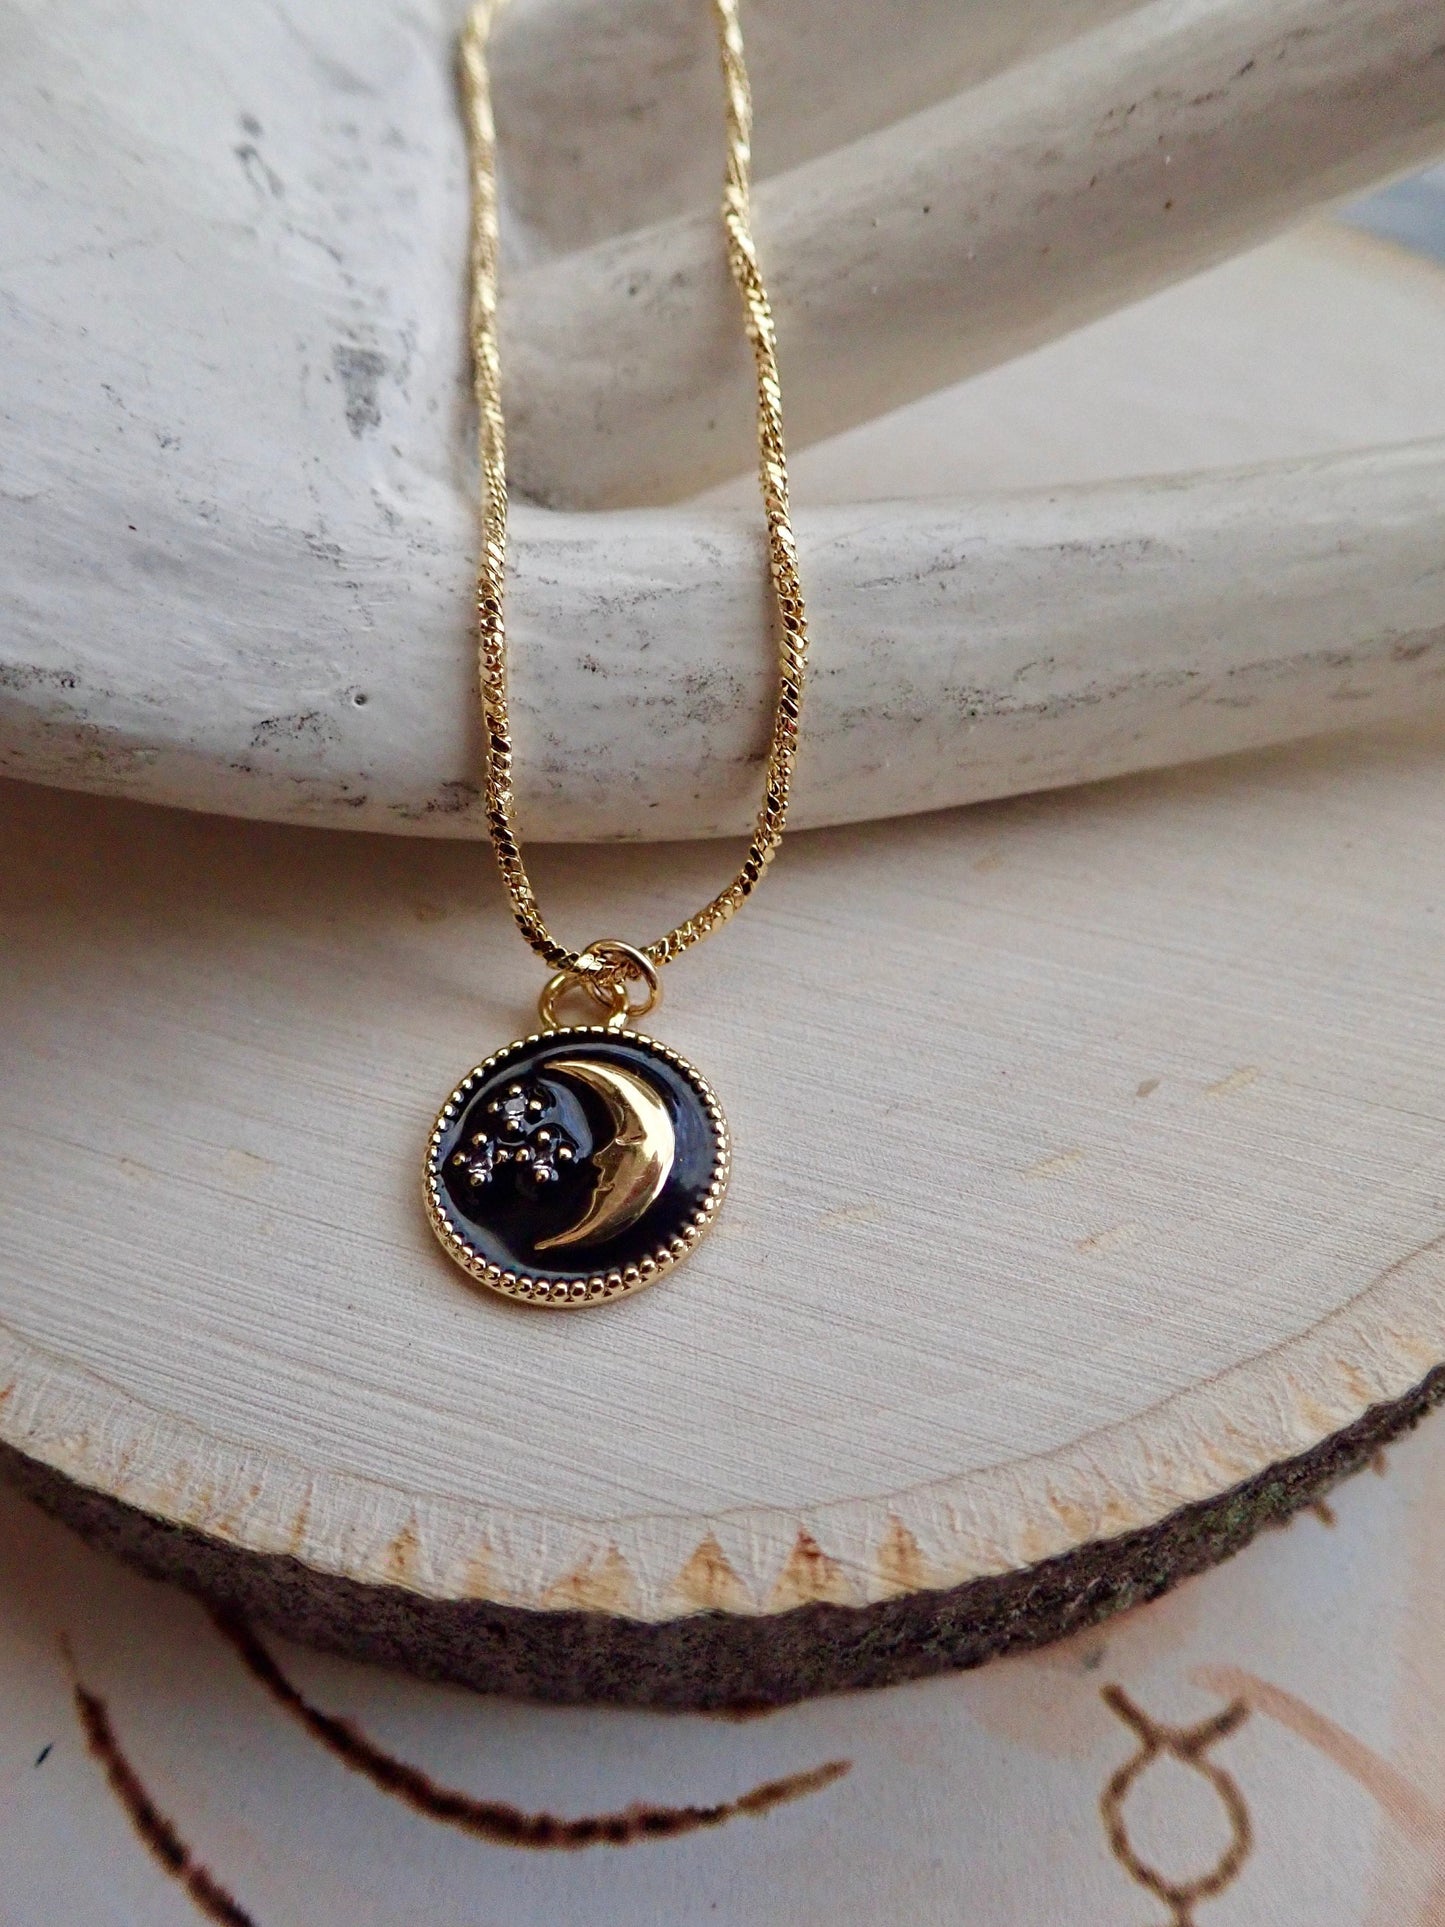 Sea of Tranquility Necklace